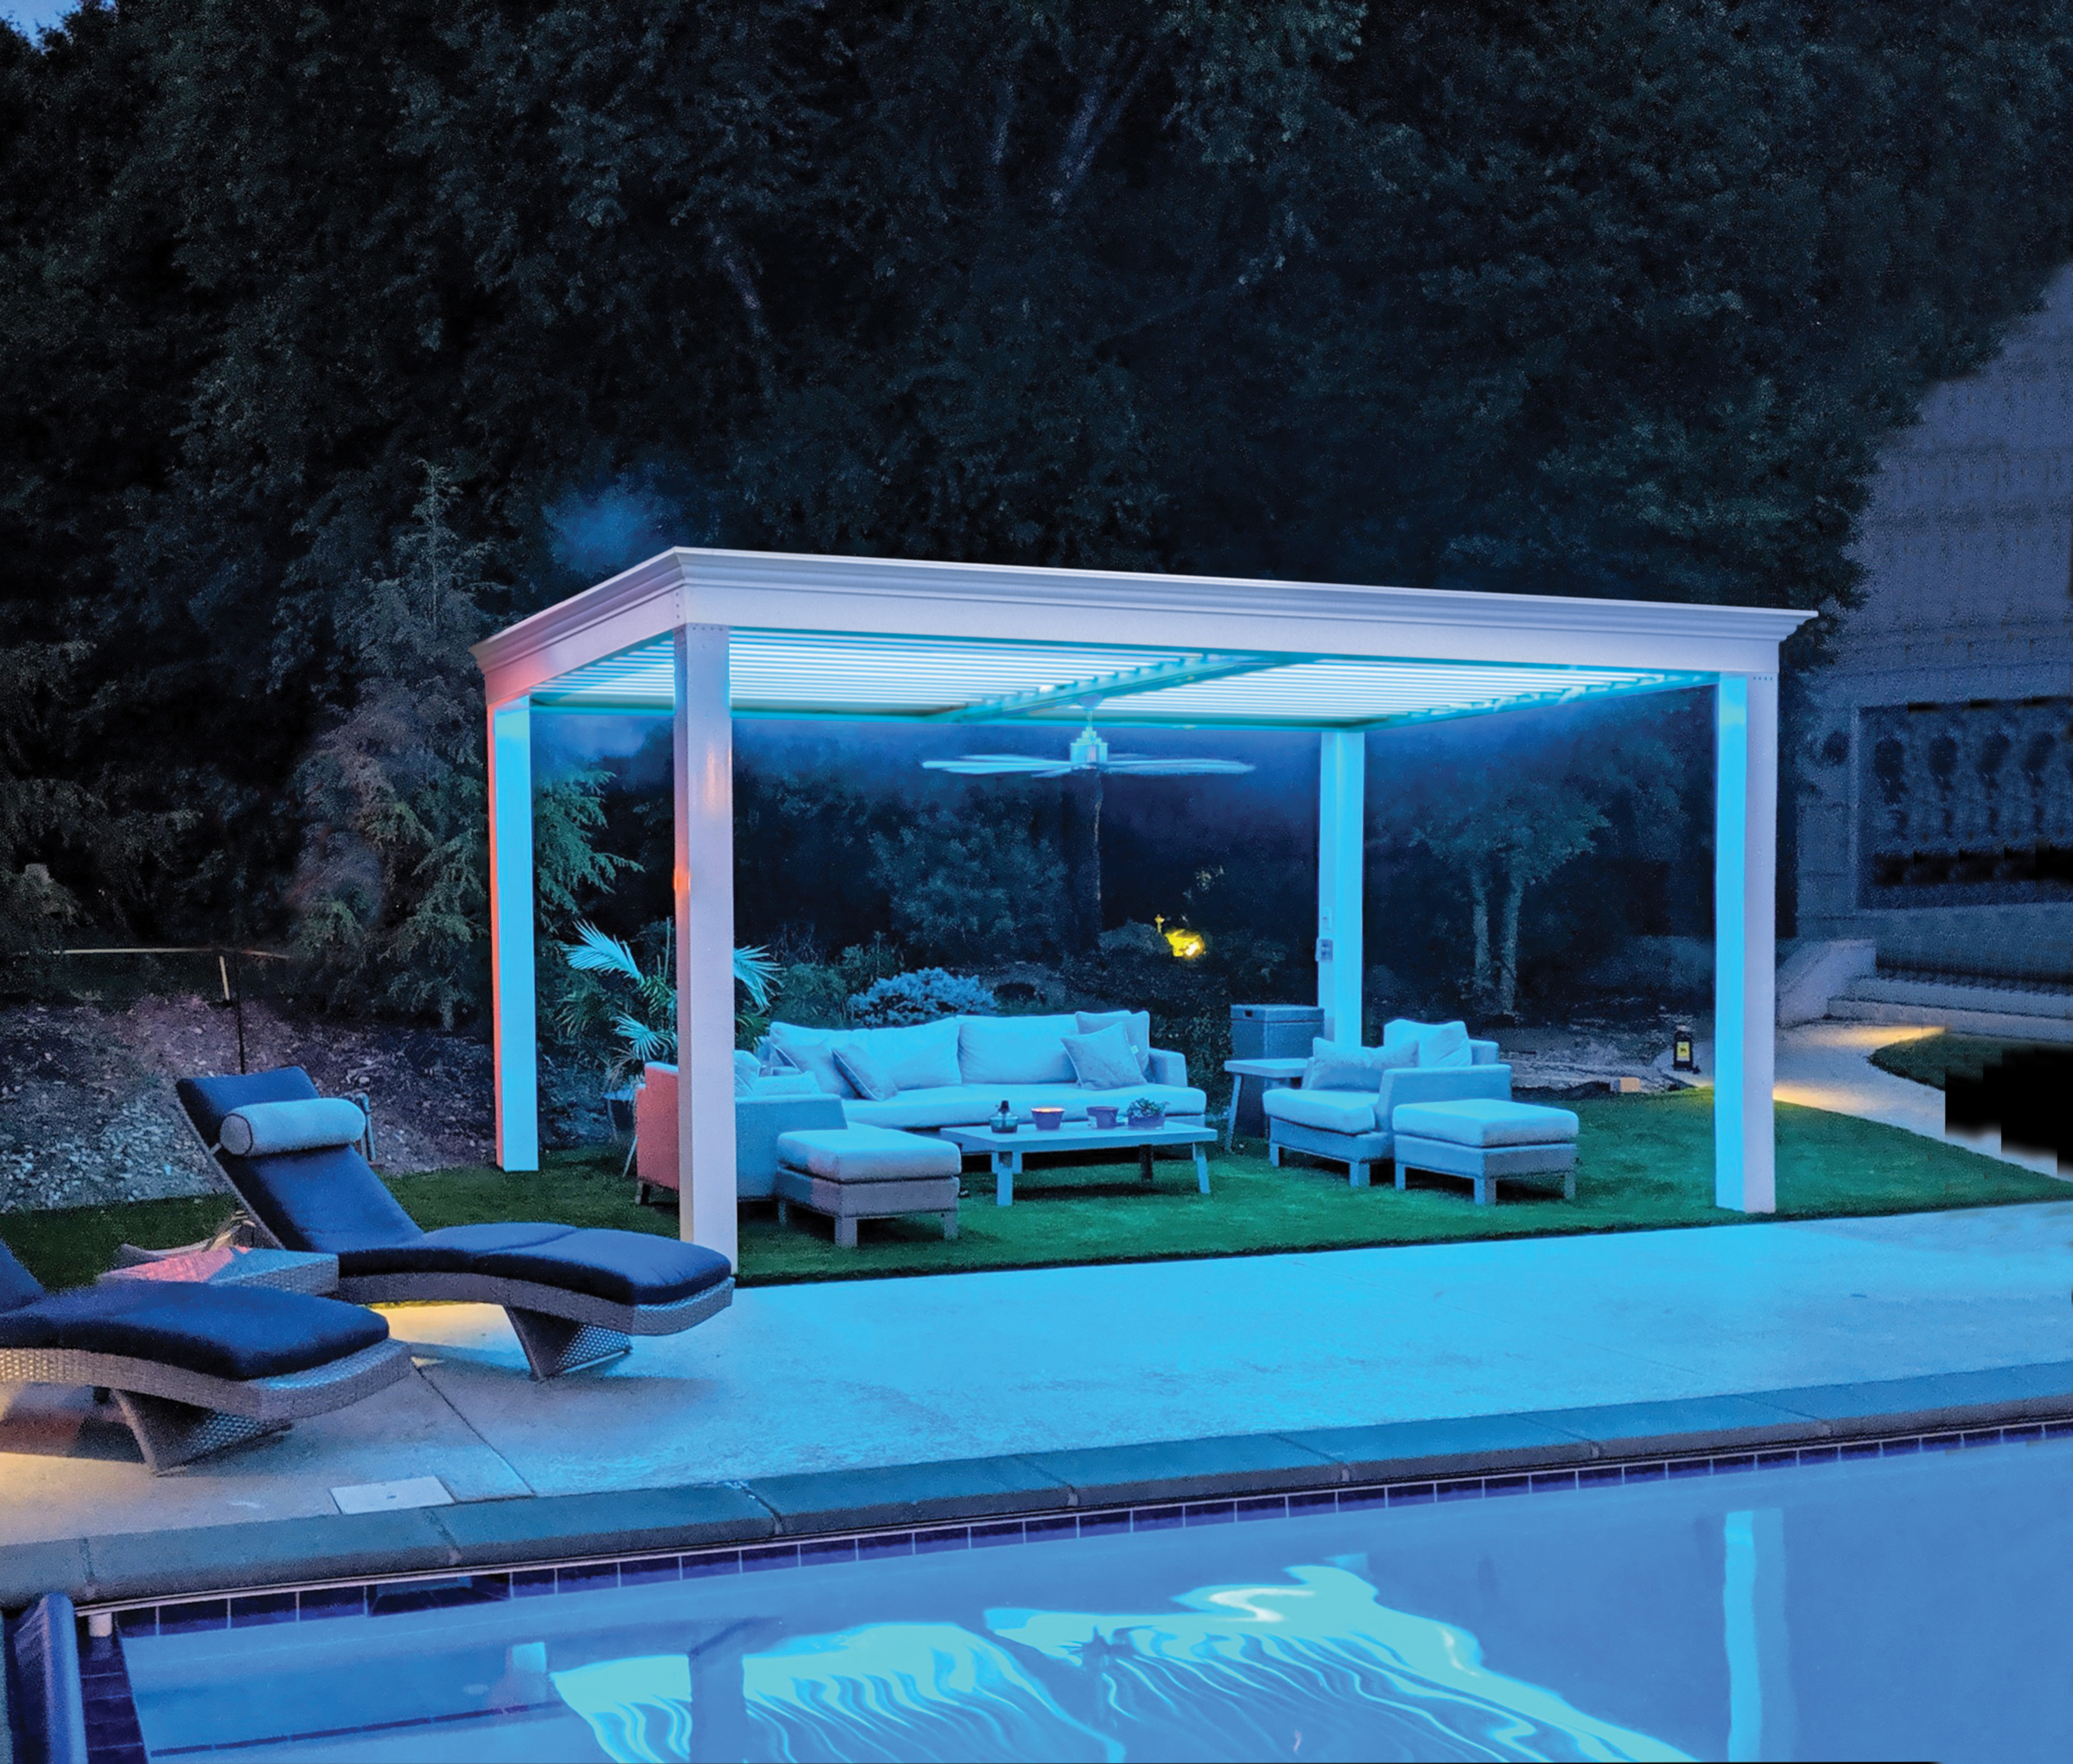 Retractable pergola with lighting can be a significant investment as a free standing structure.